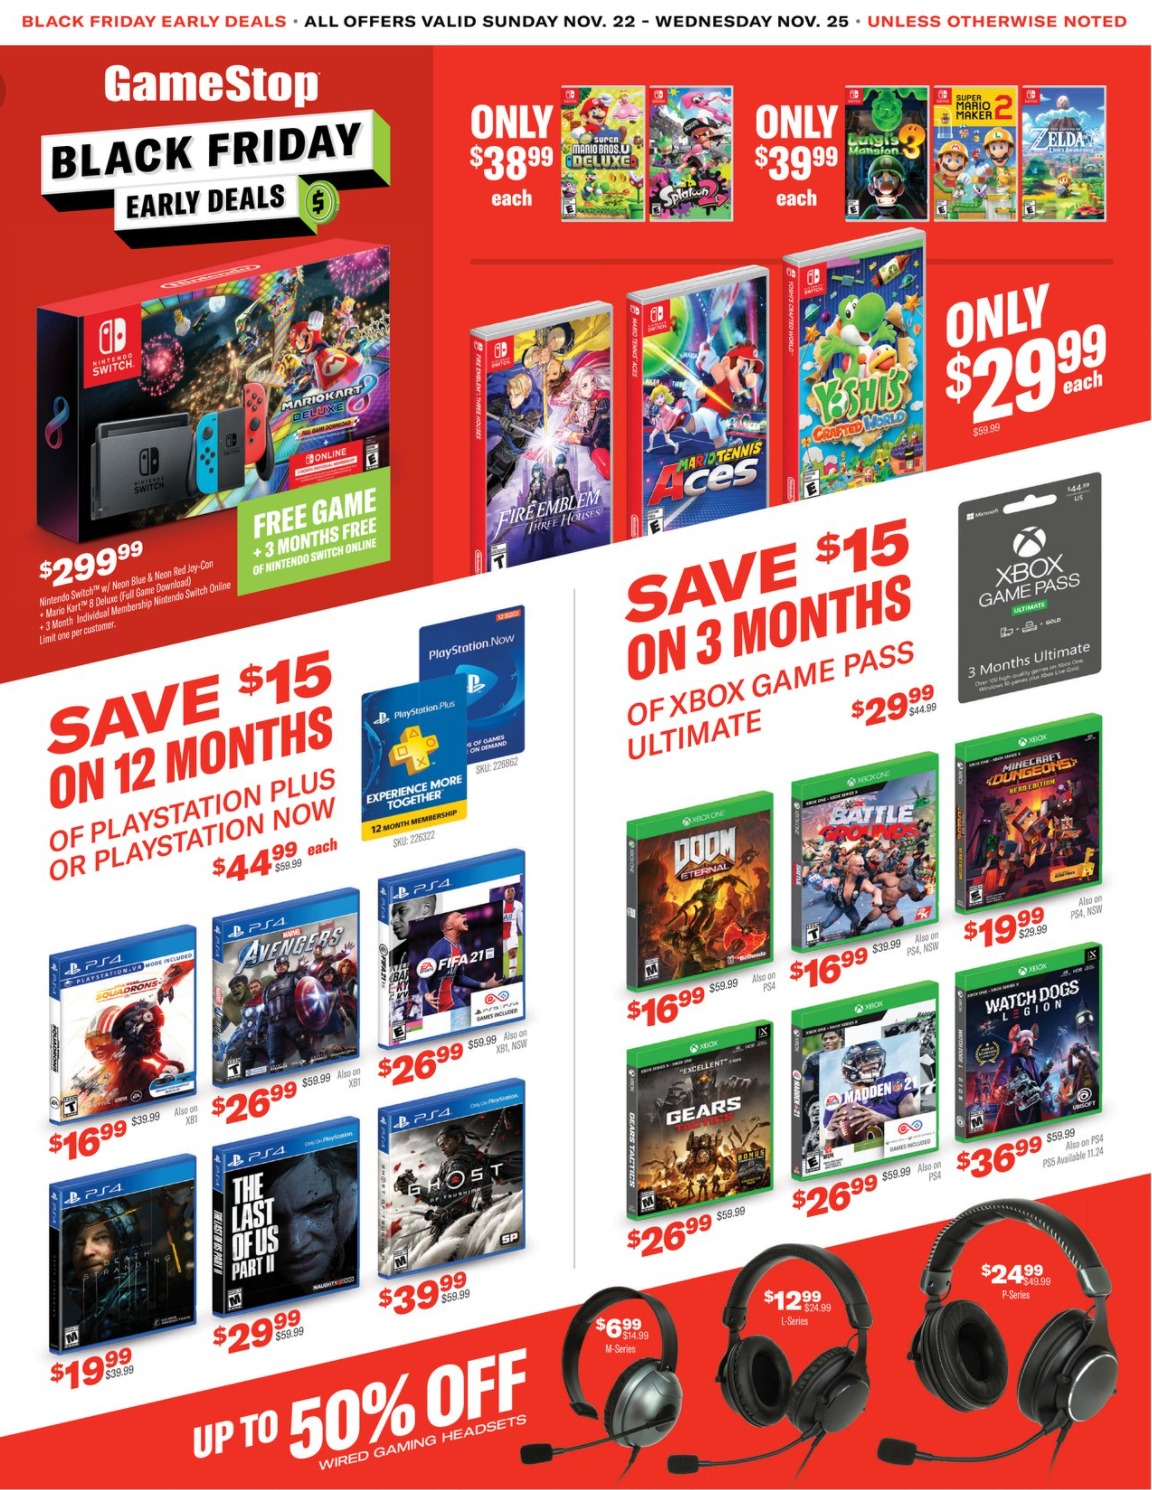 GameStop Early Black Friday Ad 2020 - What Sales Does Gamestop Have On Black Friday